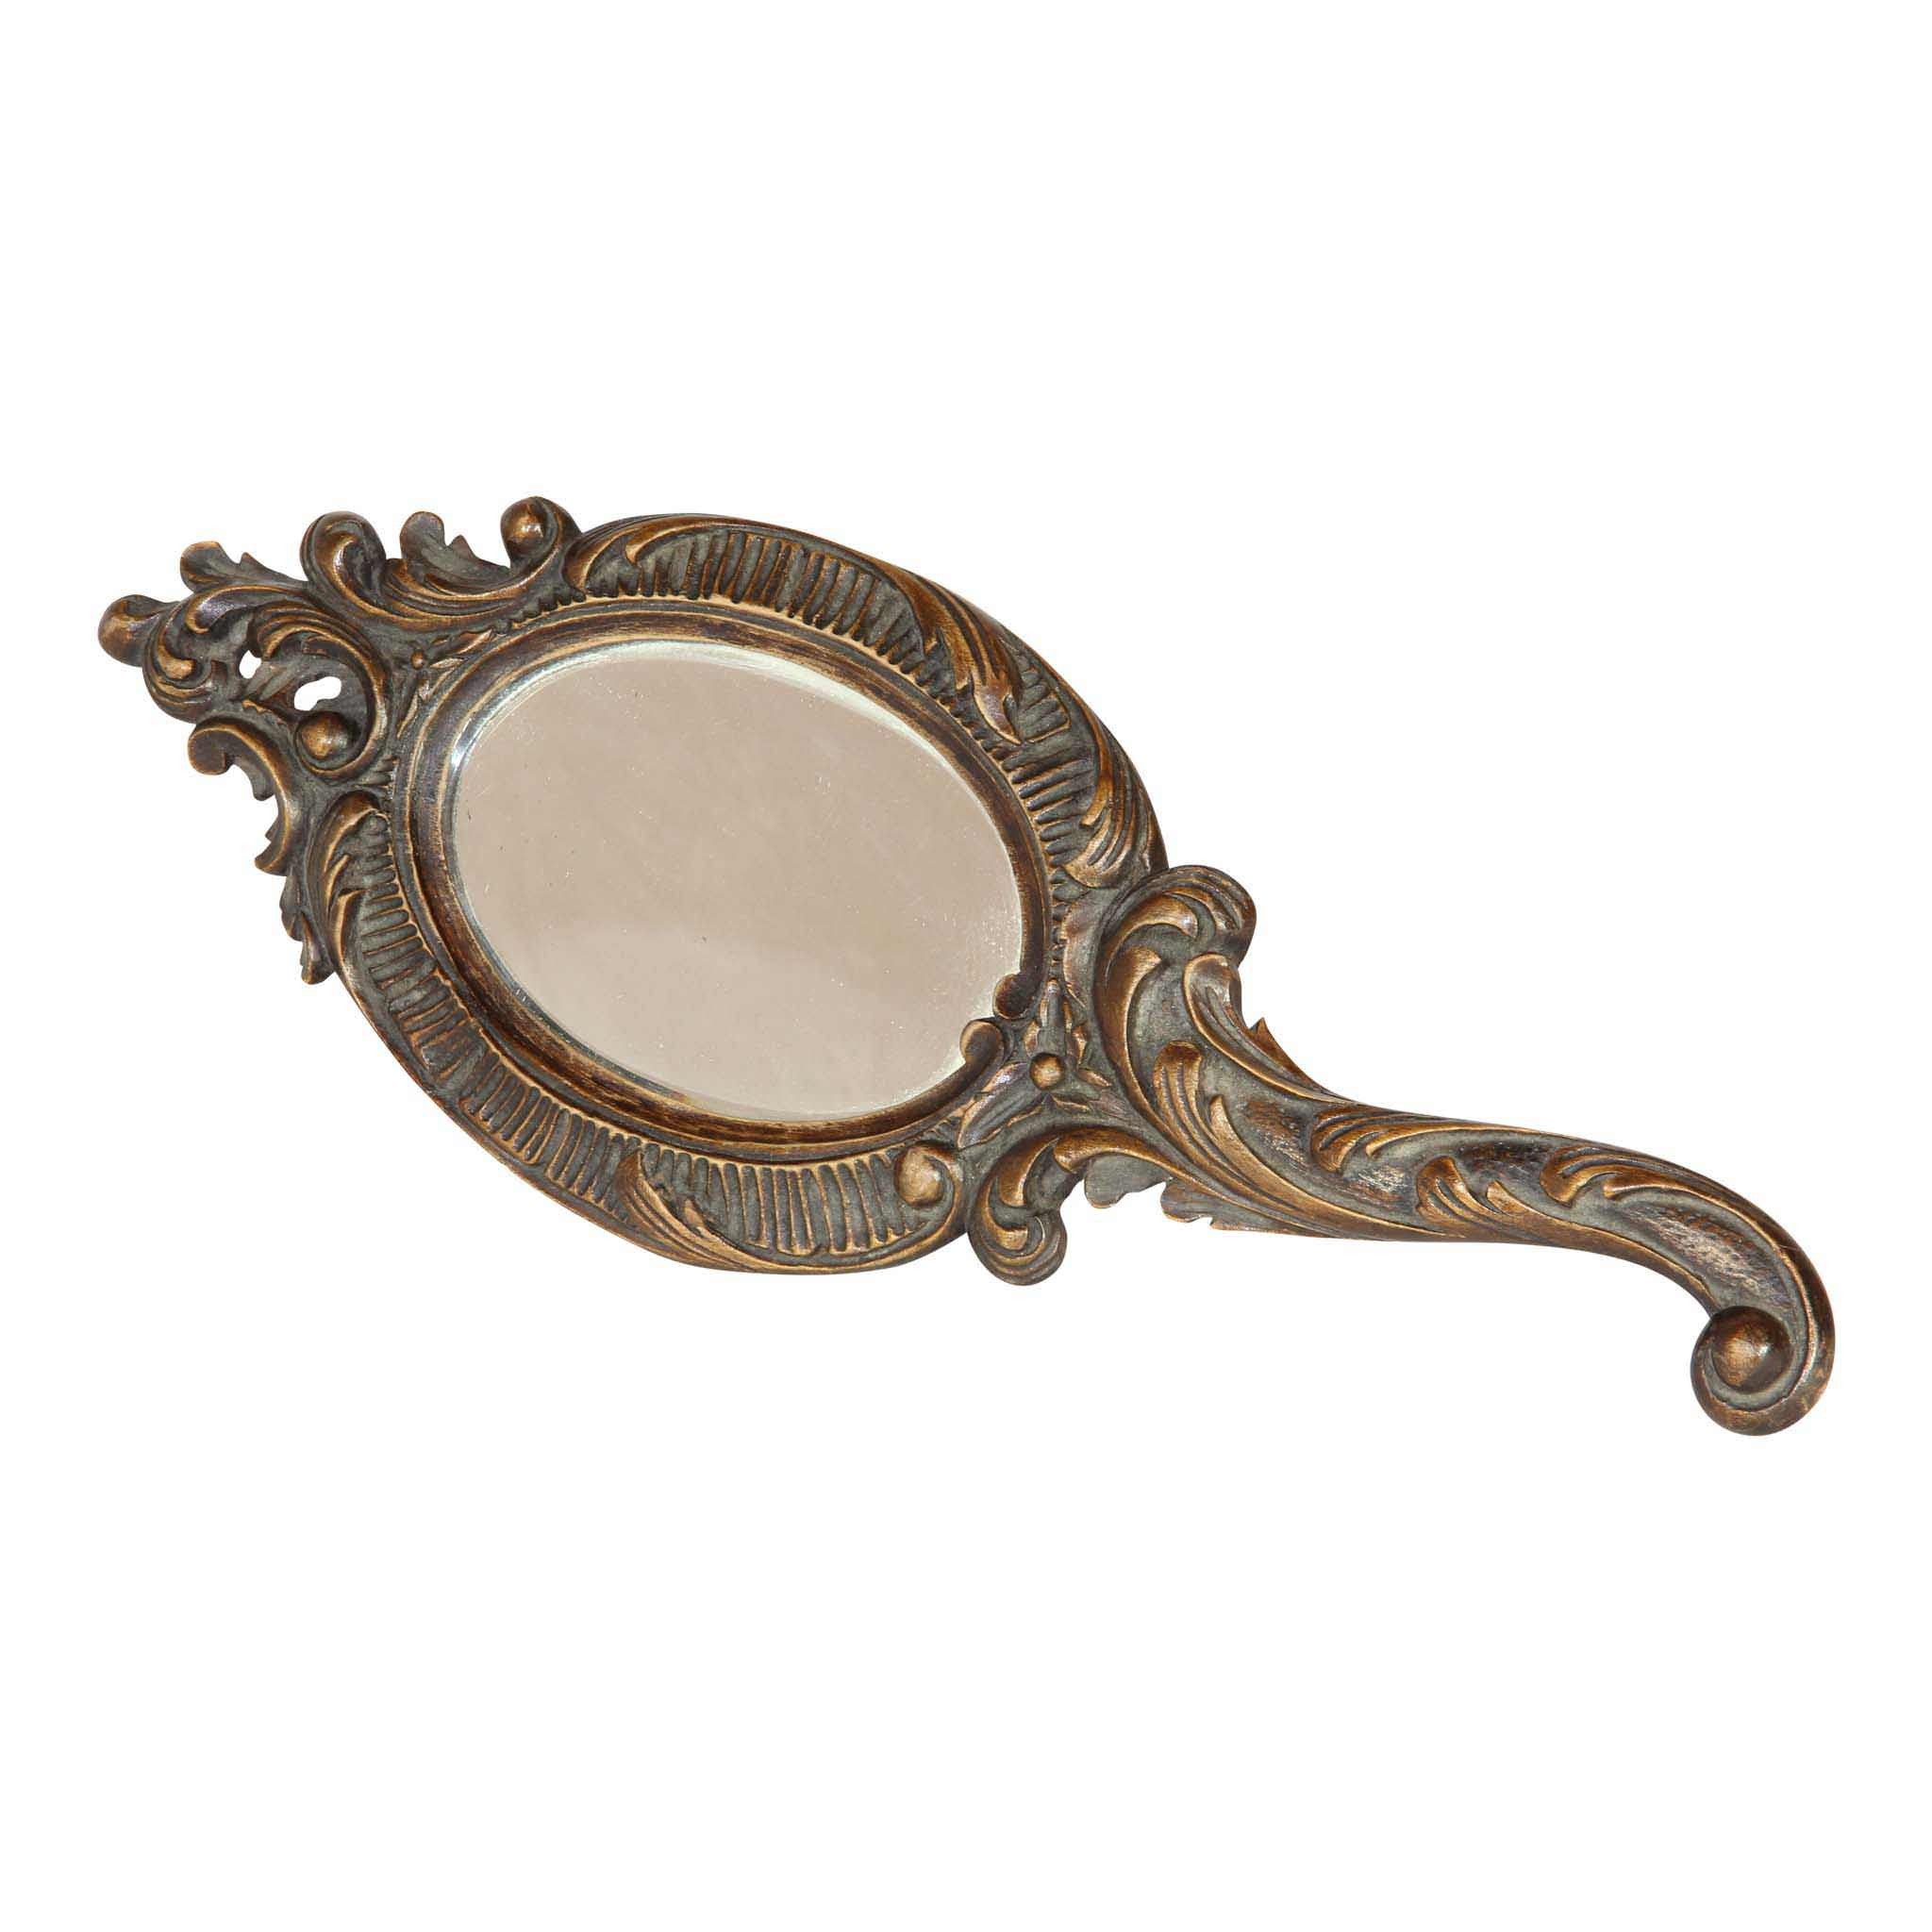 Carved Hand Mirror